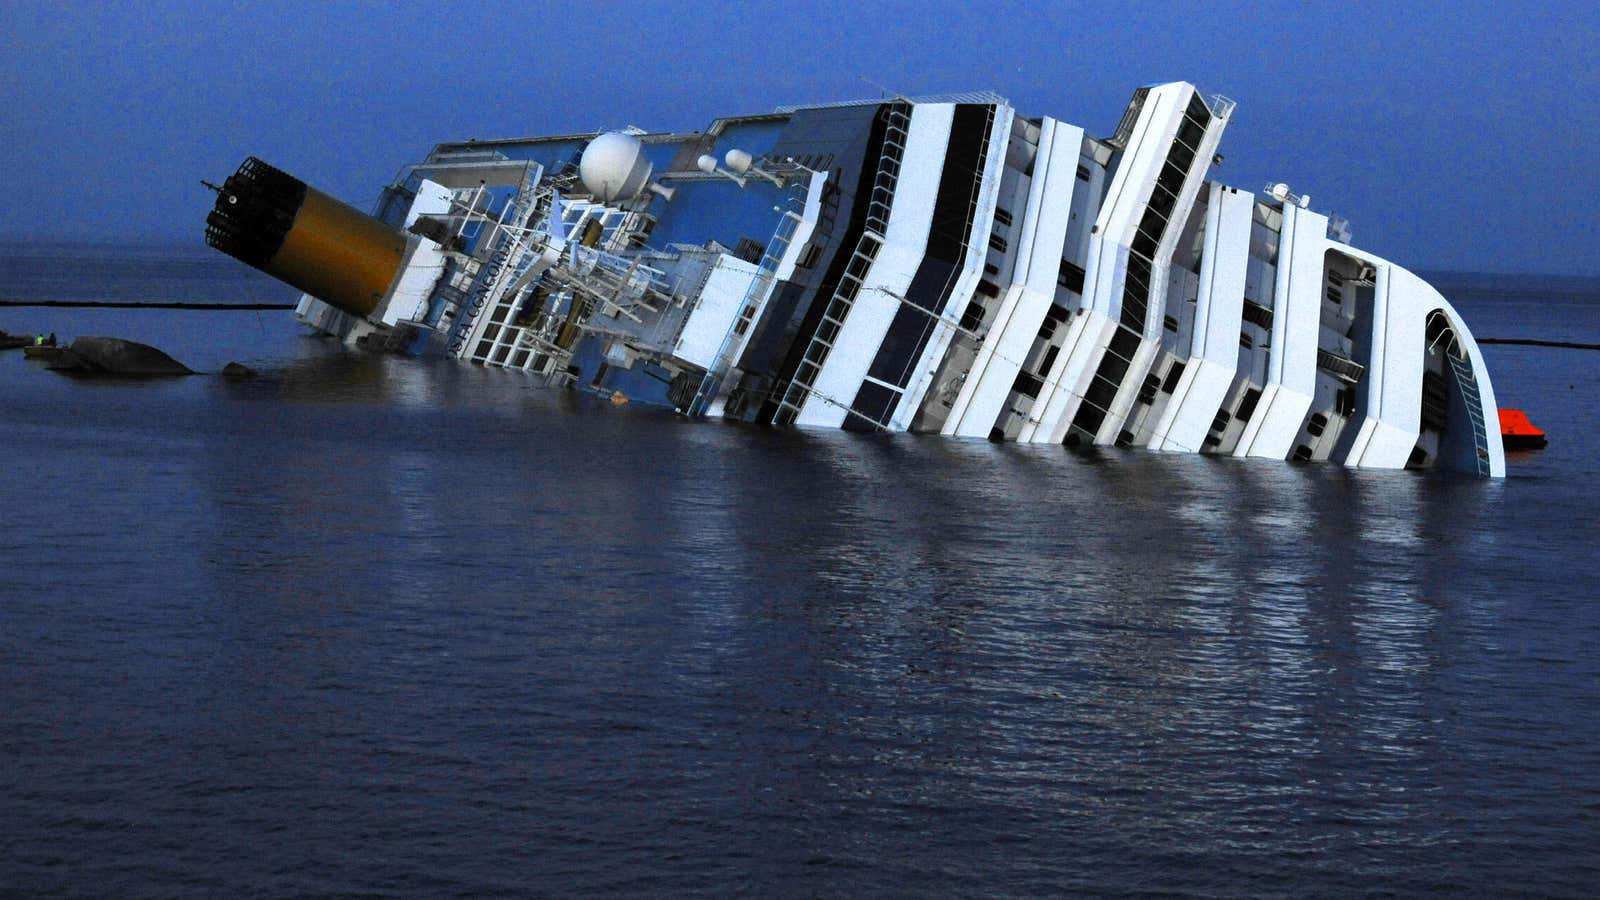 The Costa Concordia sank but Carnival, its owner, stays afloat.